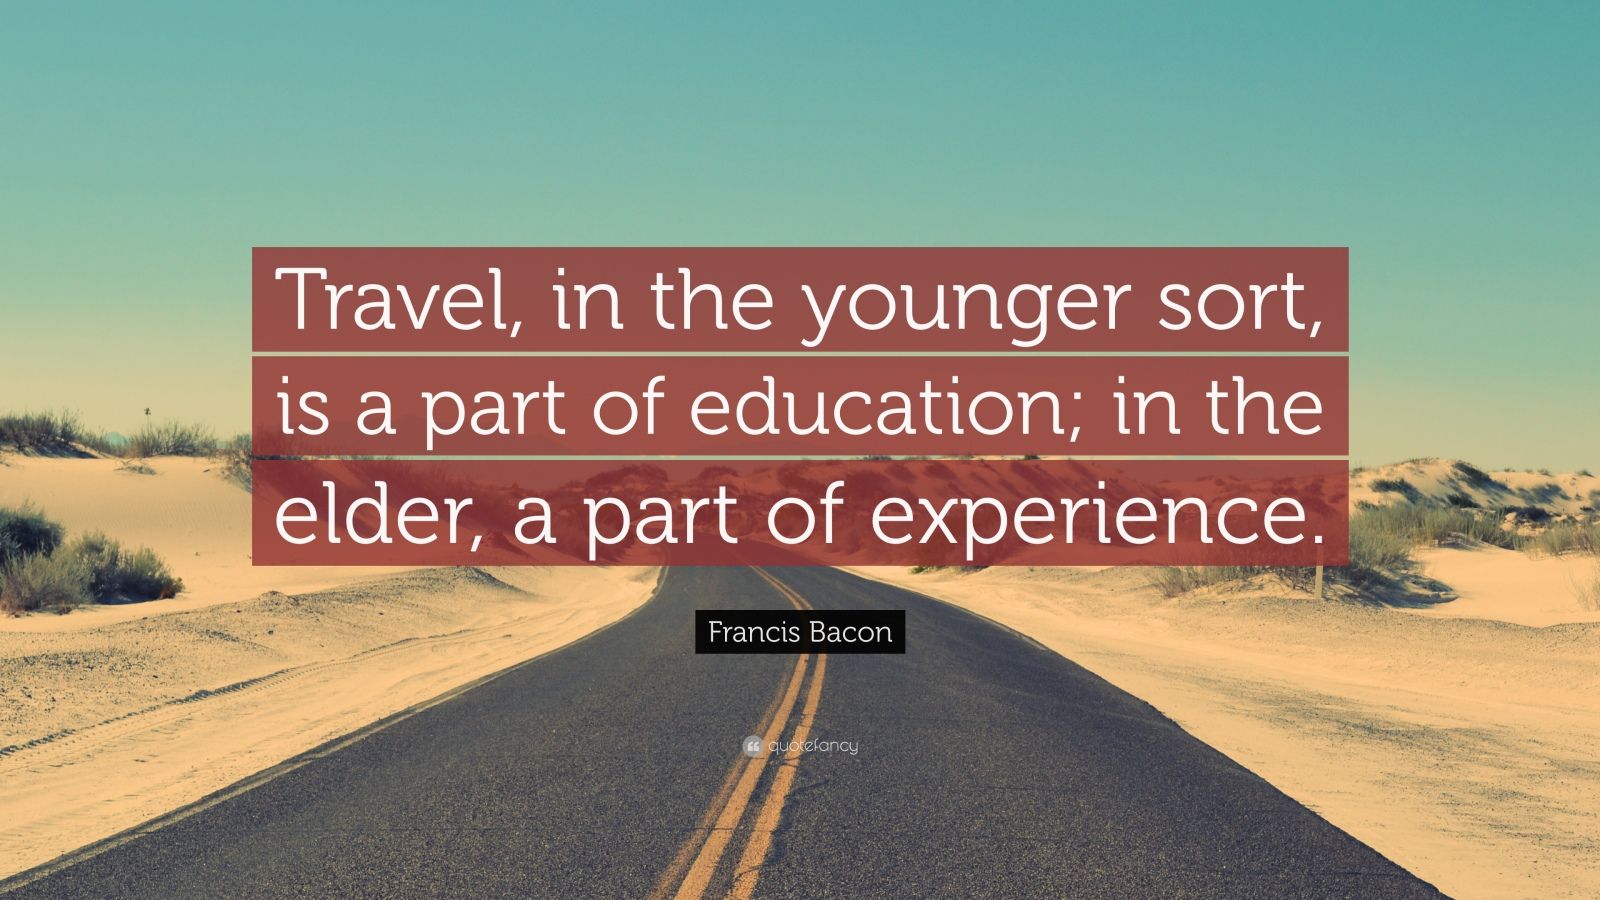 travelling is a part of education